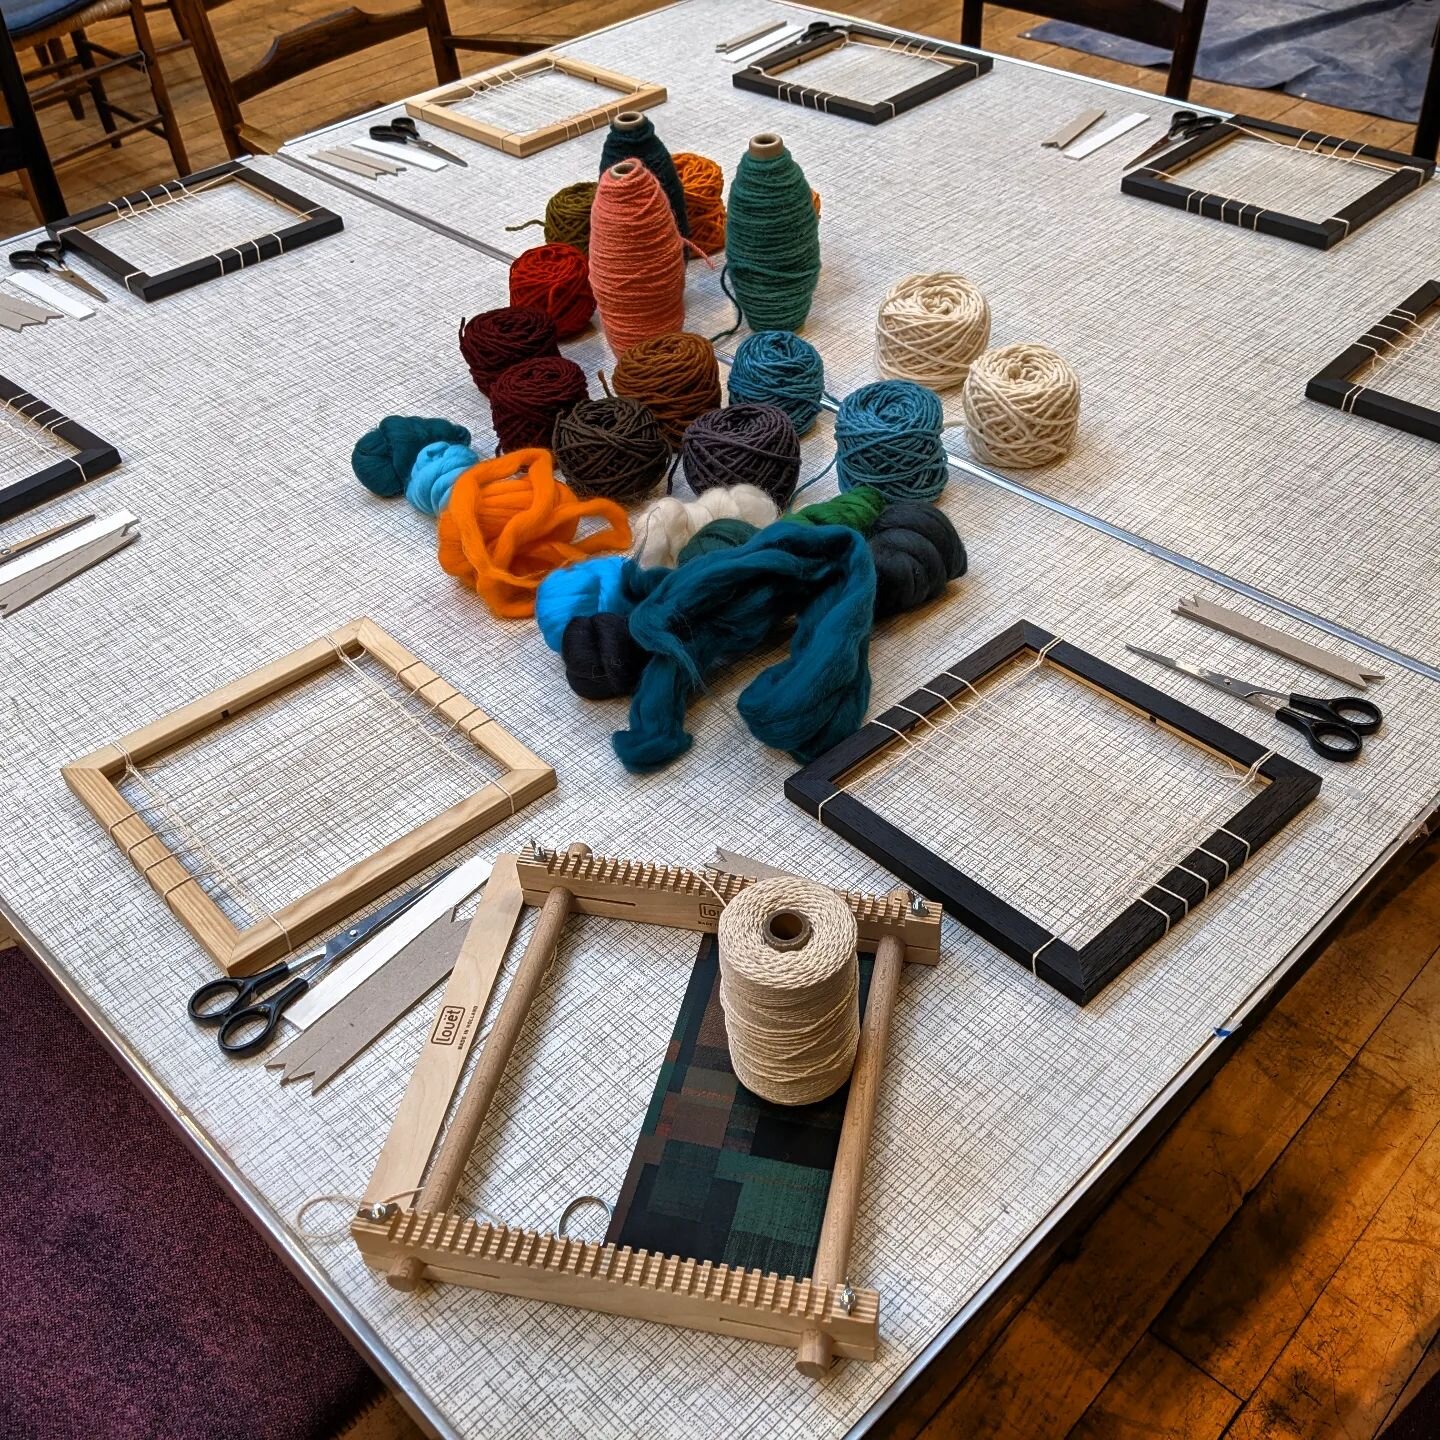 Just setting up for a workshop at the Art Workers Guild.  Excited to pass on my skills to some eager students!
.
.
.
.
.
#workship #tapestryweaving #textiles #weaver #yarn #design #craft #weaving #artisan #contemporarycraft #designideas #ideas #moder